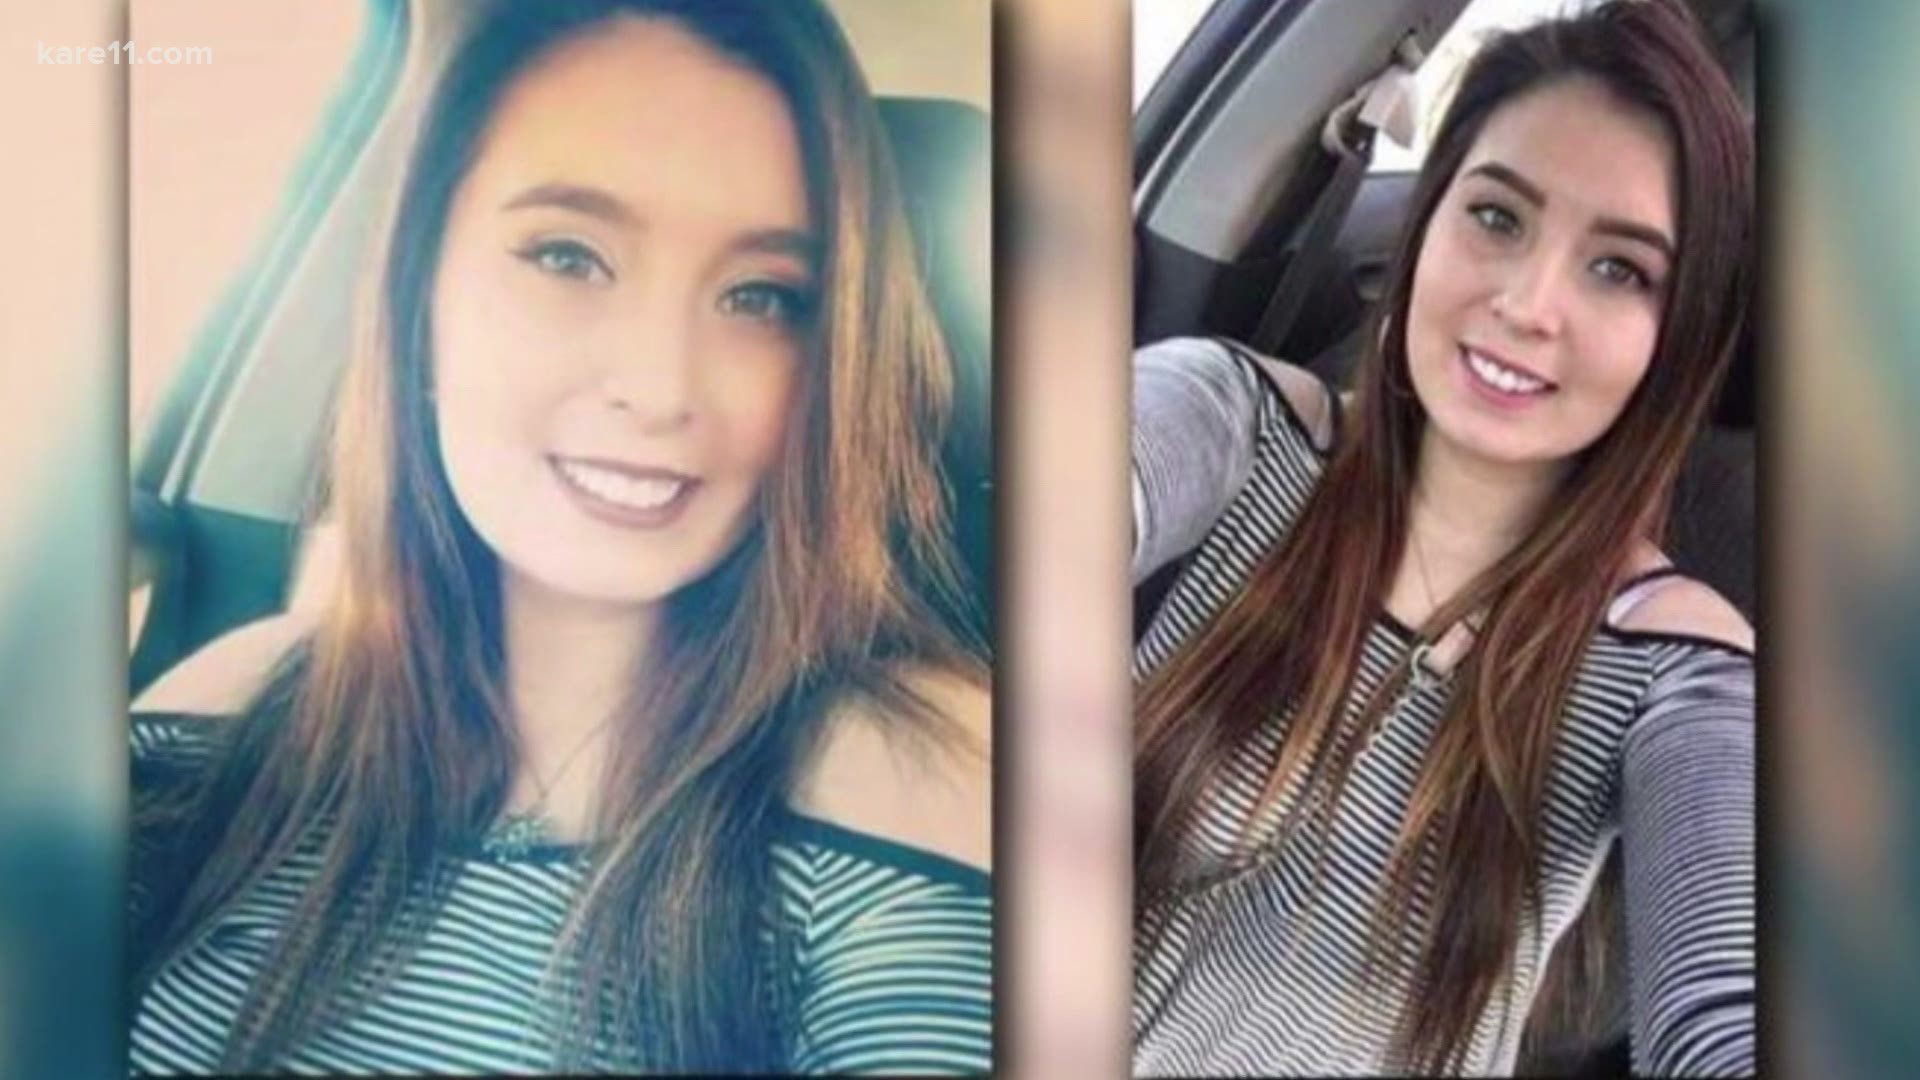 It is named for Savanna LaFontaine-Greywind - a Native woman murdered in North Dakota in 2017.